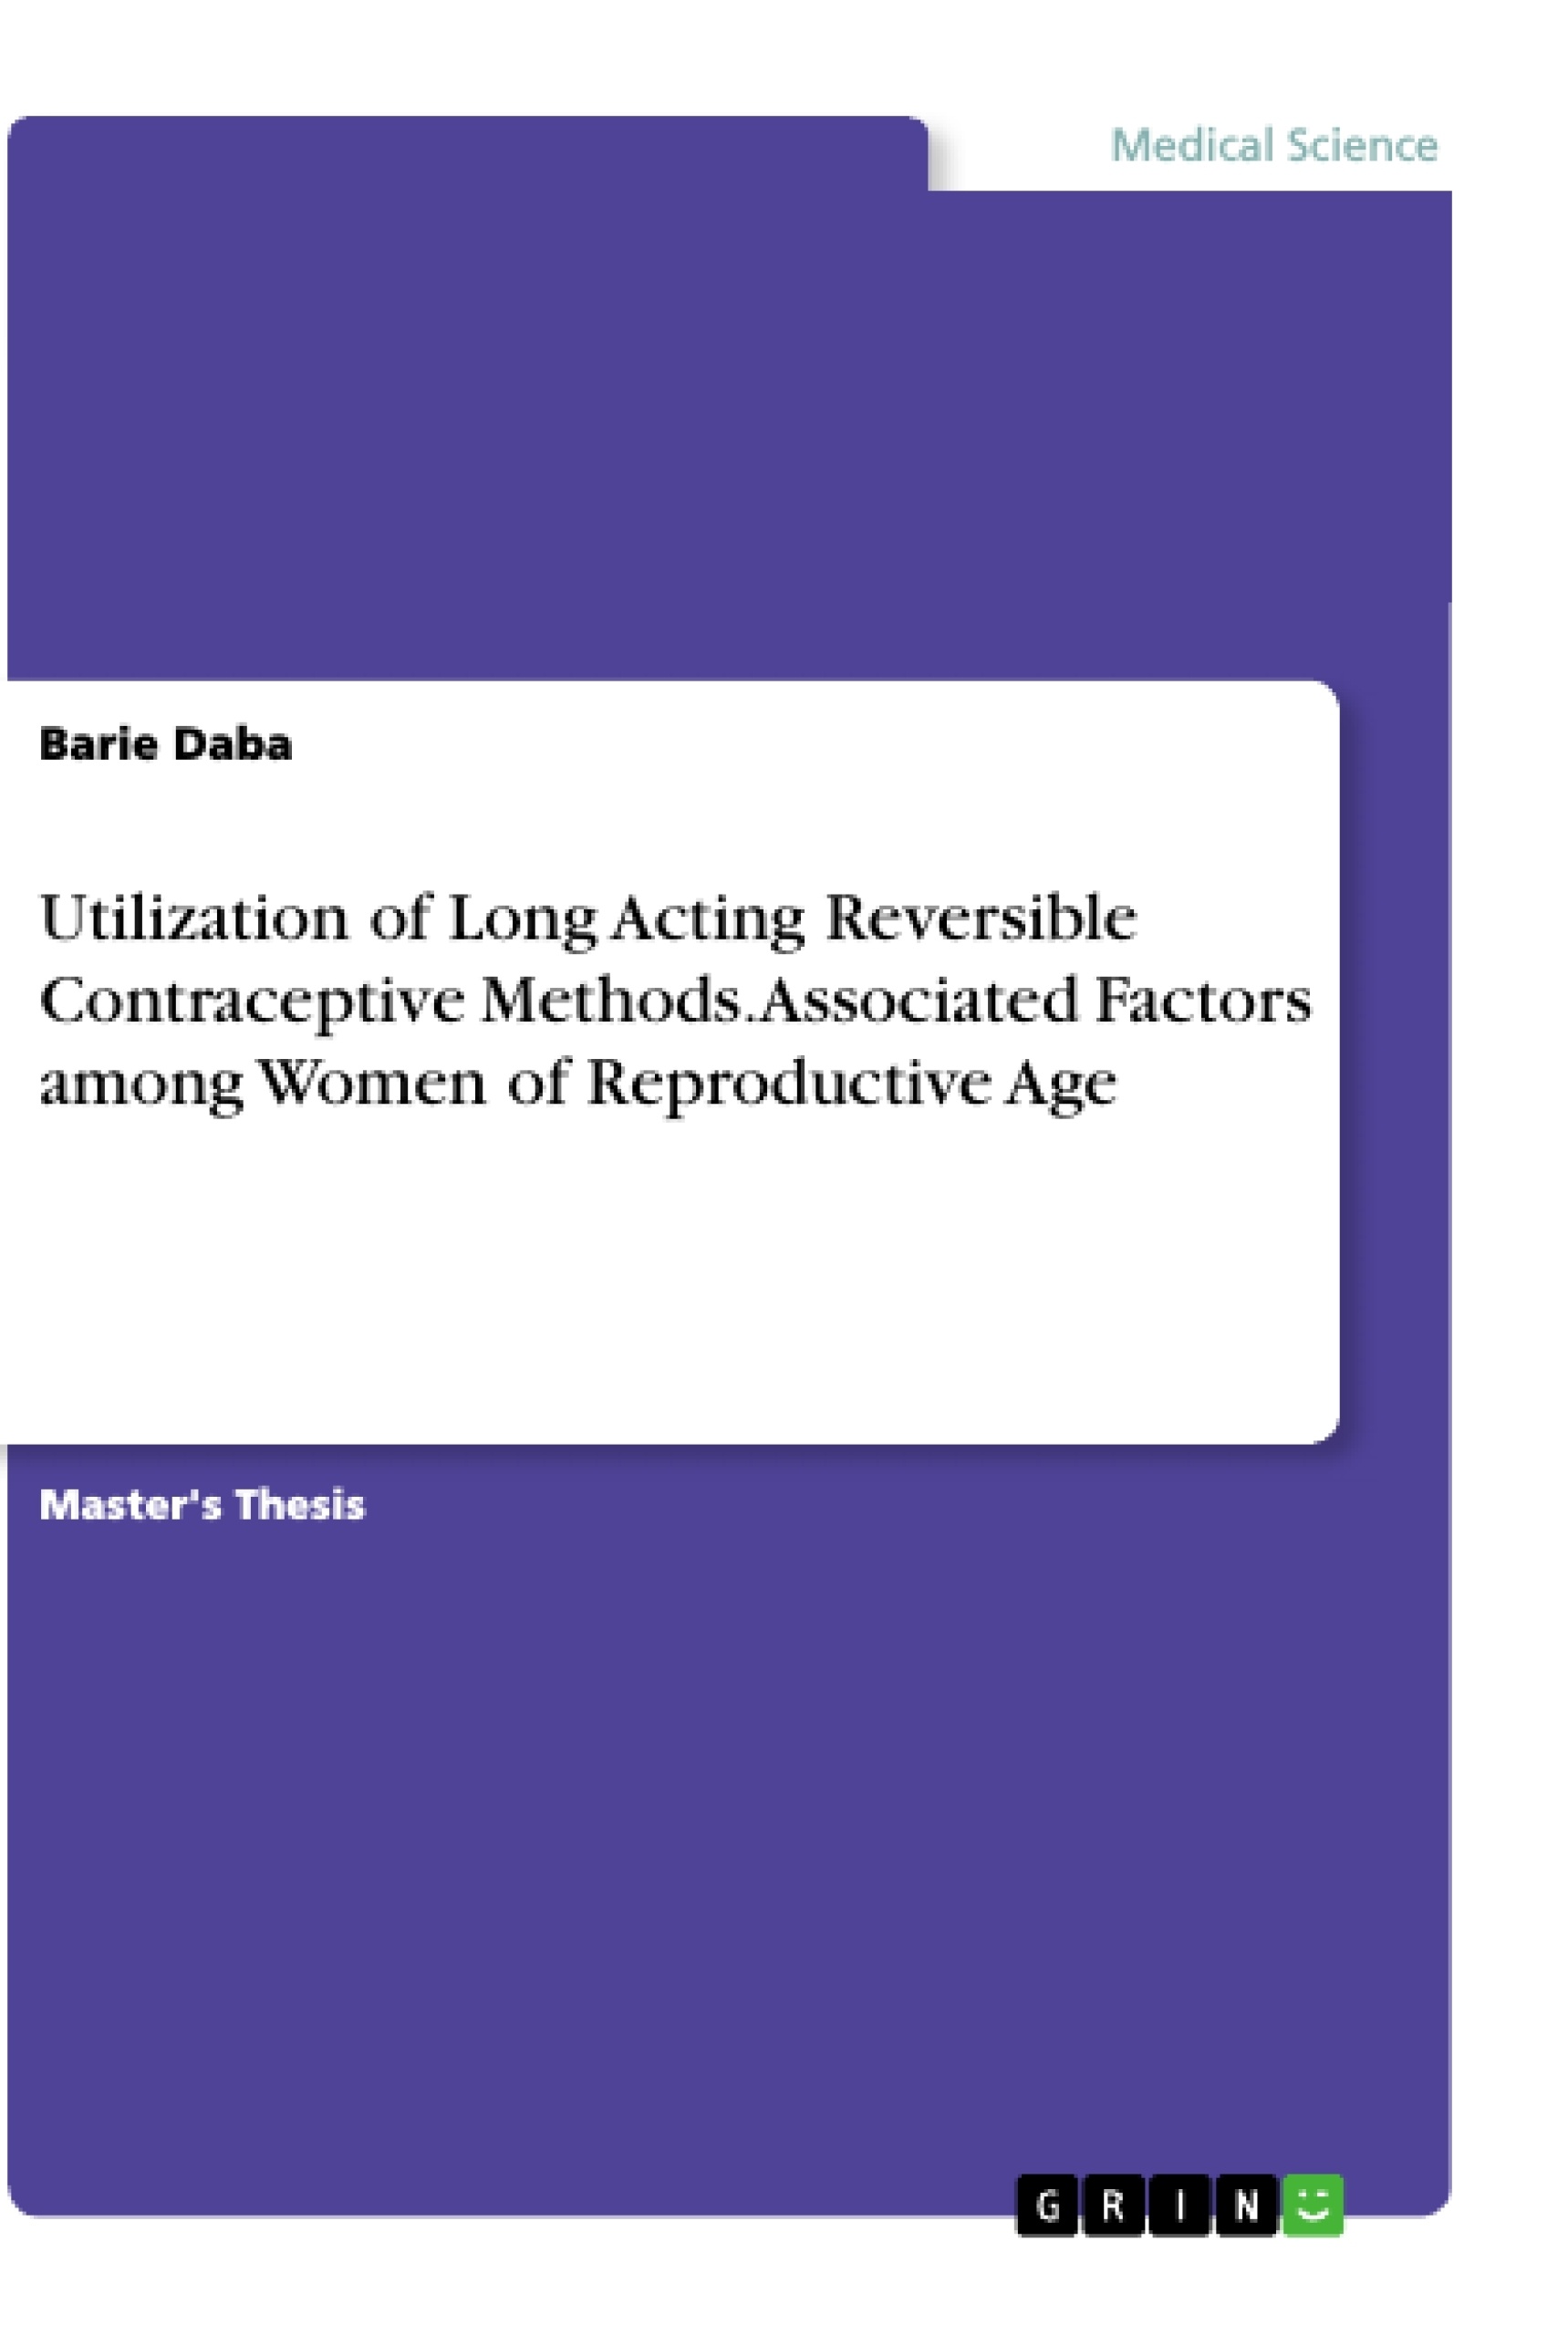 Titre: Utilization of Long Acting Reversible Contraceptive Methods. Associated Factors among Women of Reproductive Age